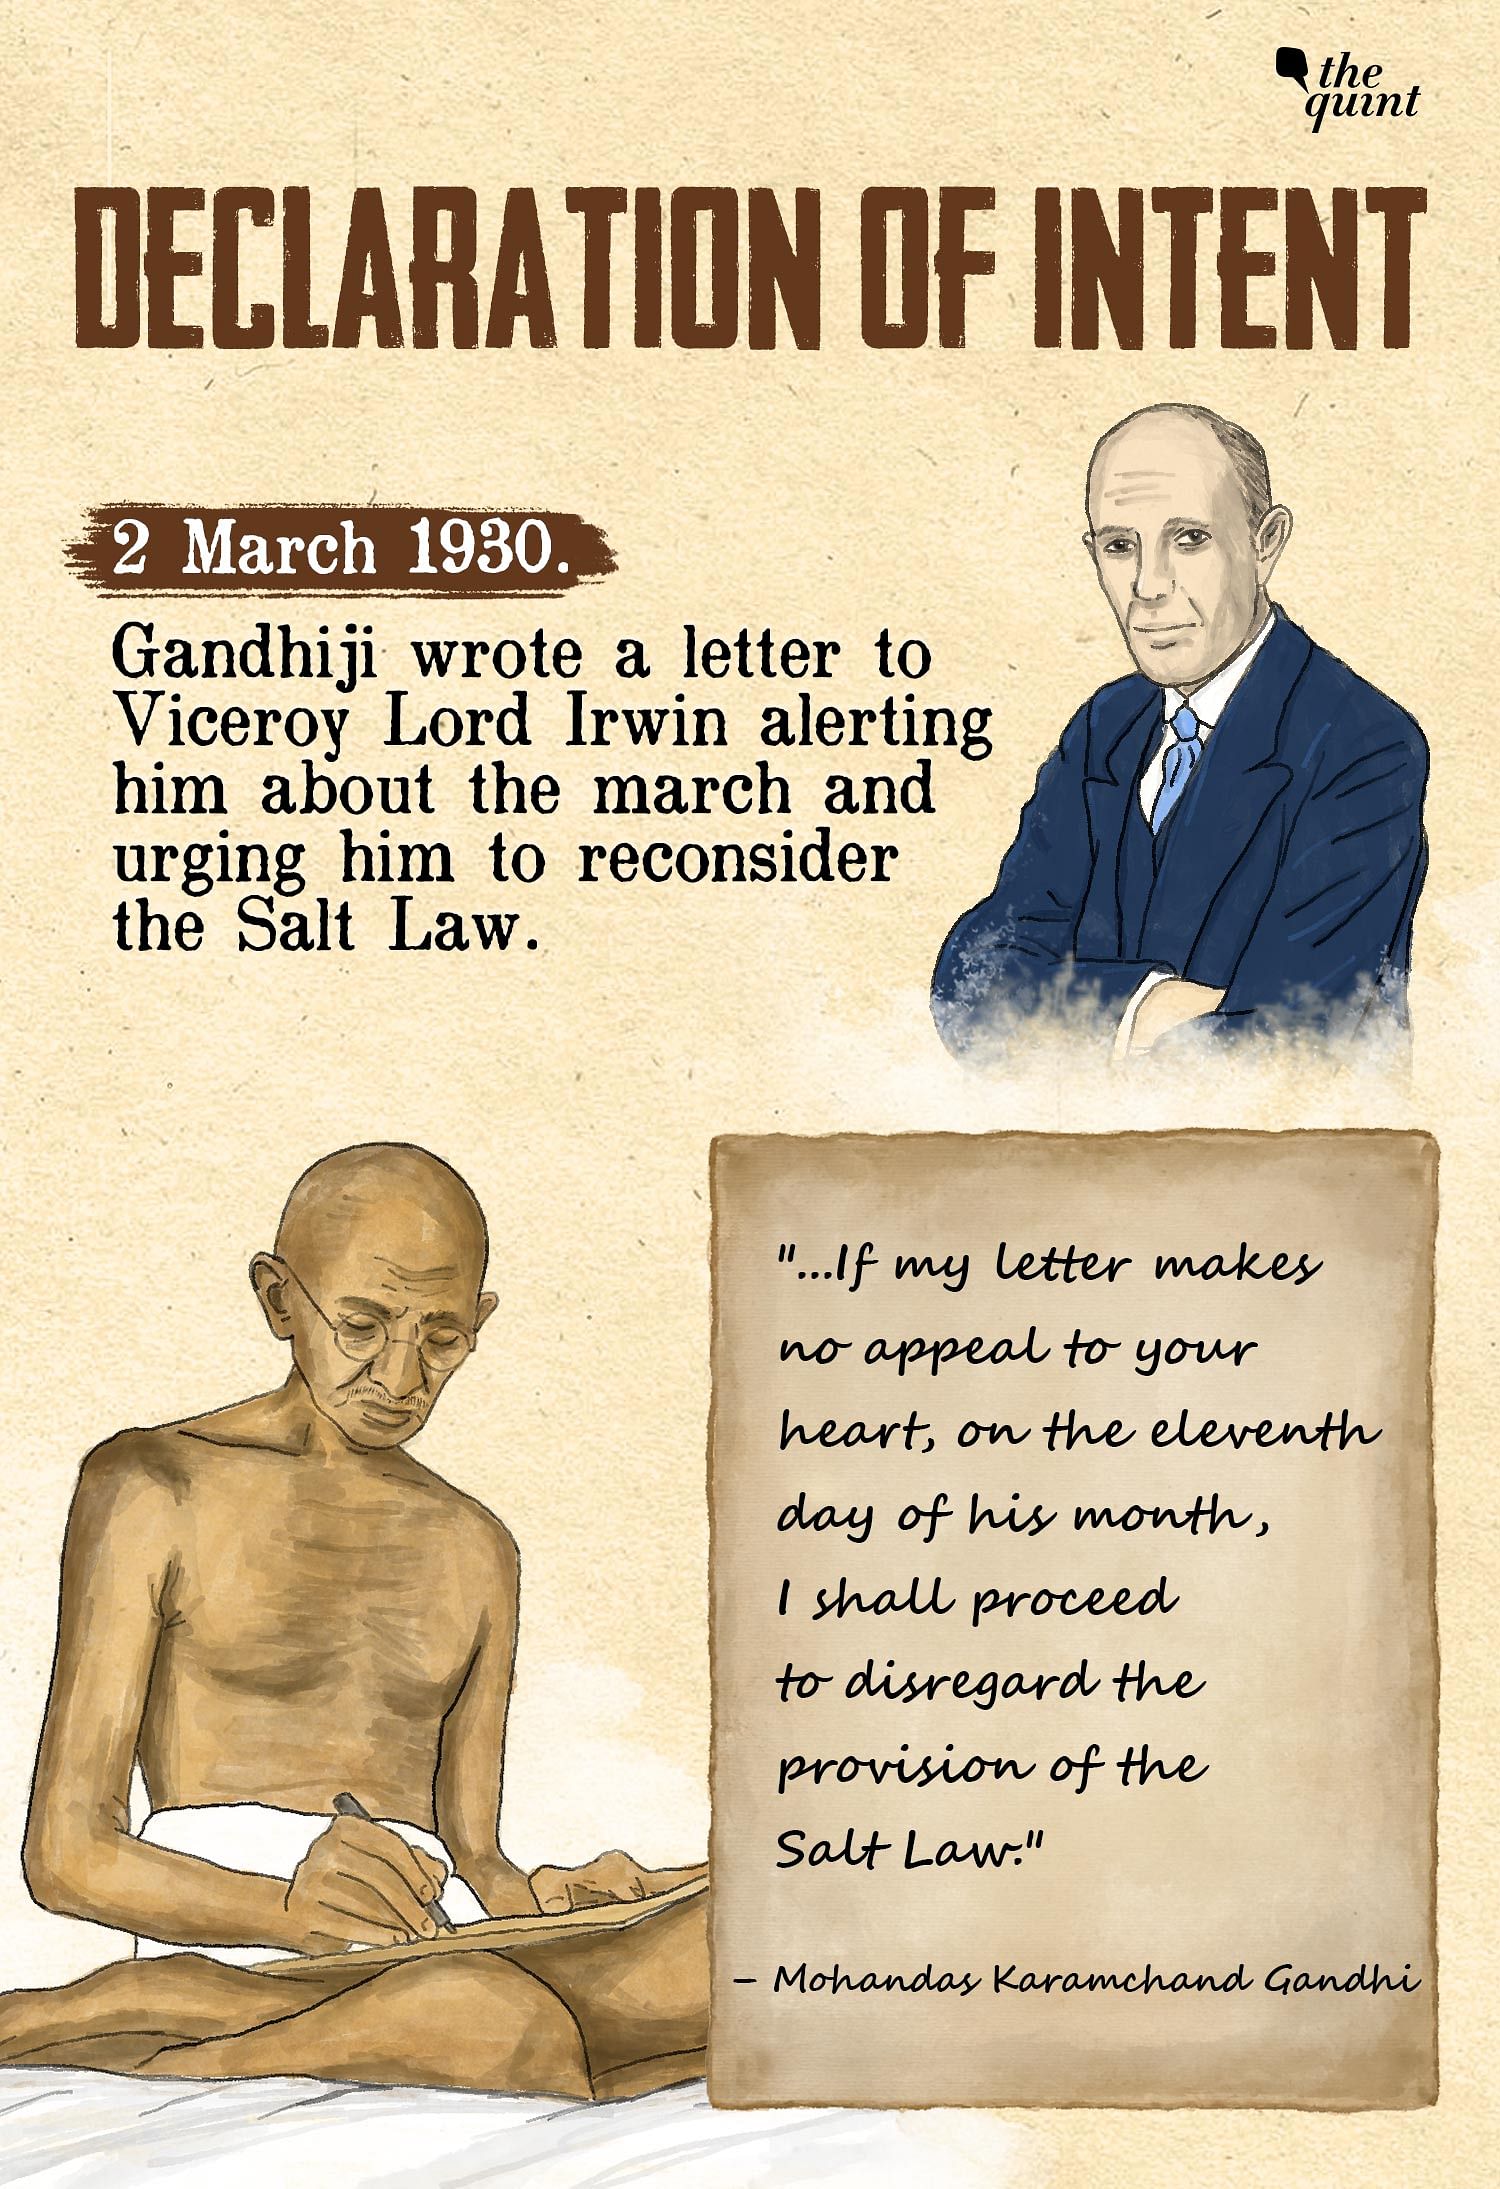 mohandas k. gandhi led a march in the 1930s to protest the british government’s monopoly on